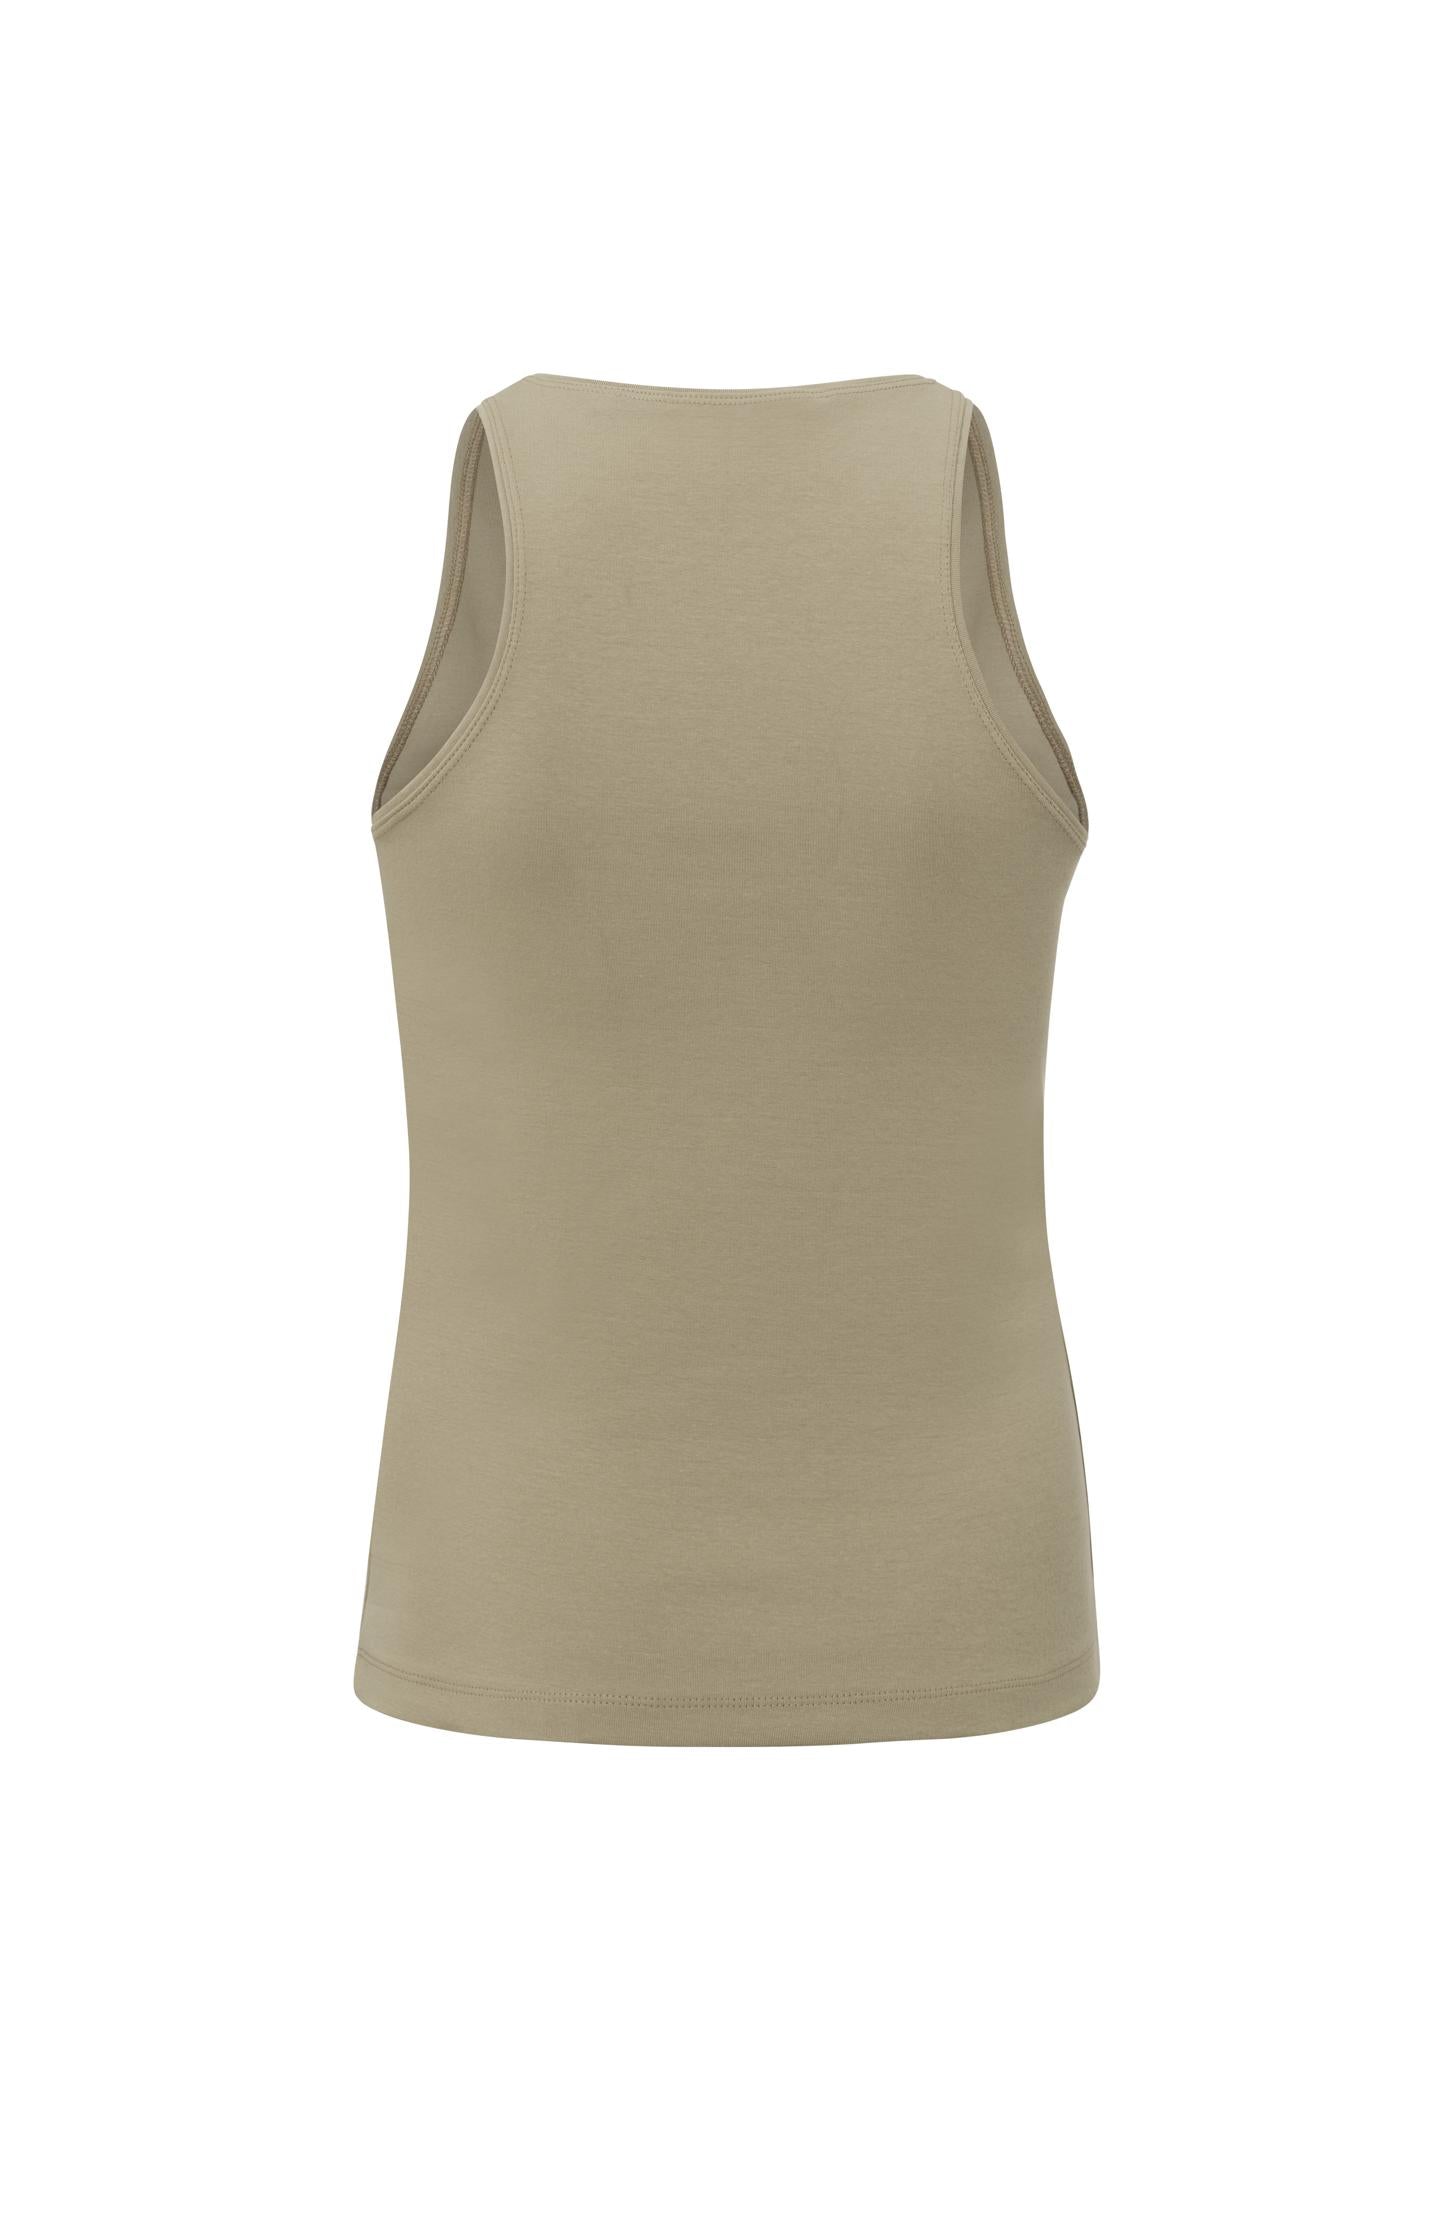 Basic halter top with crewneck in slim fit